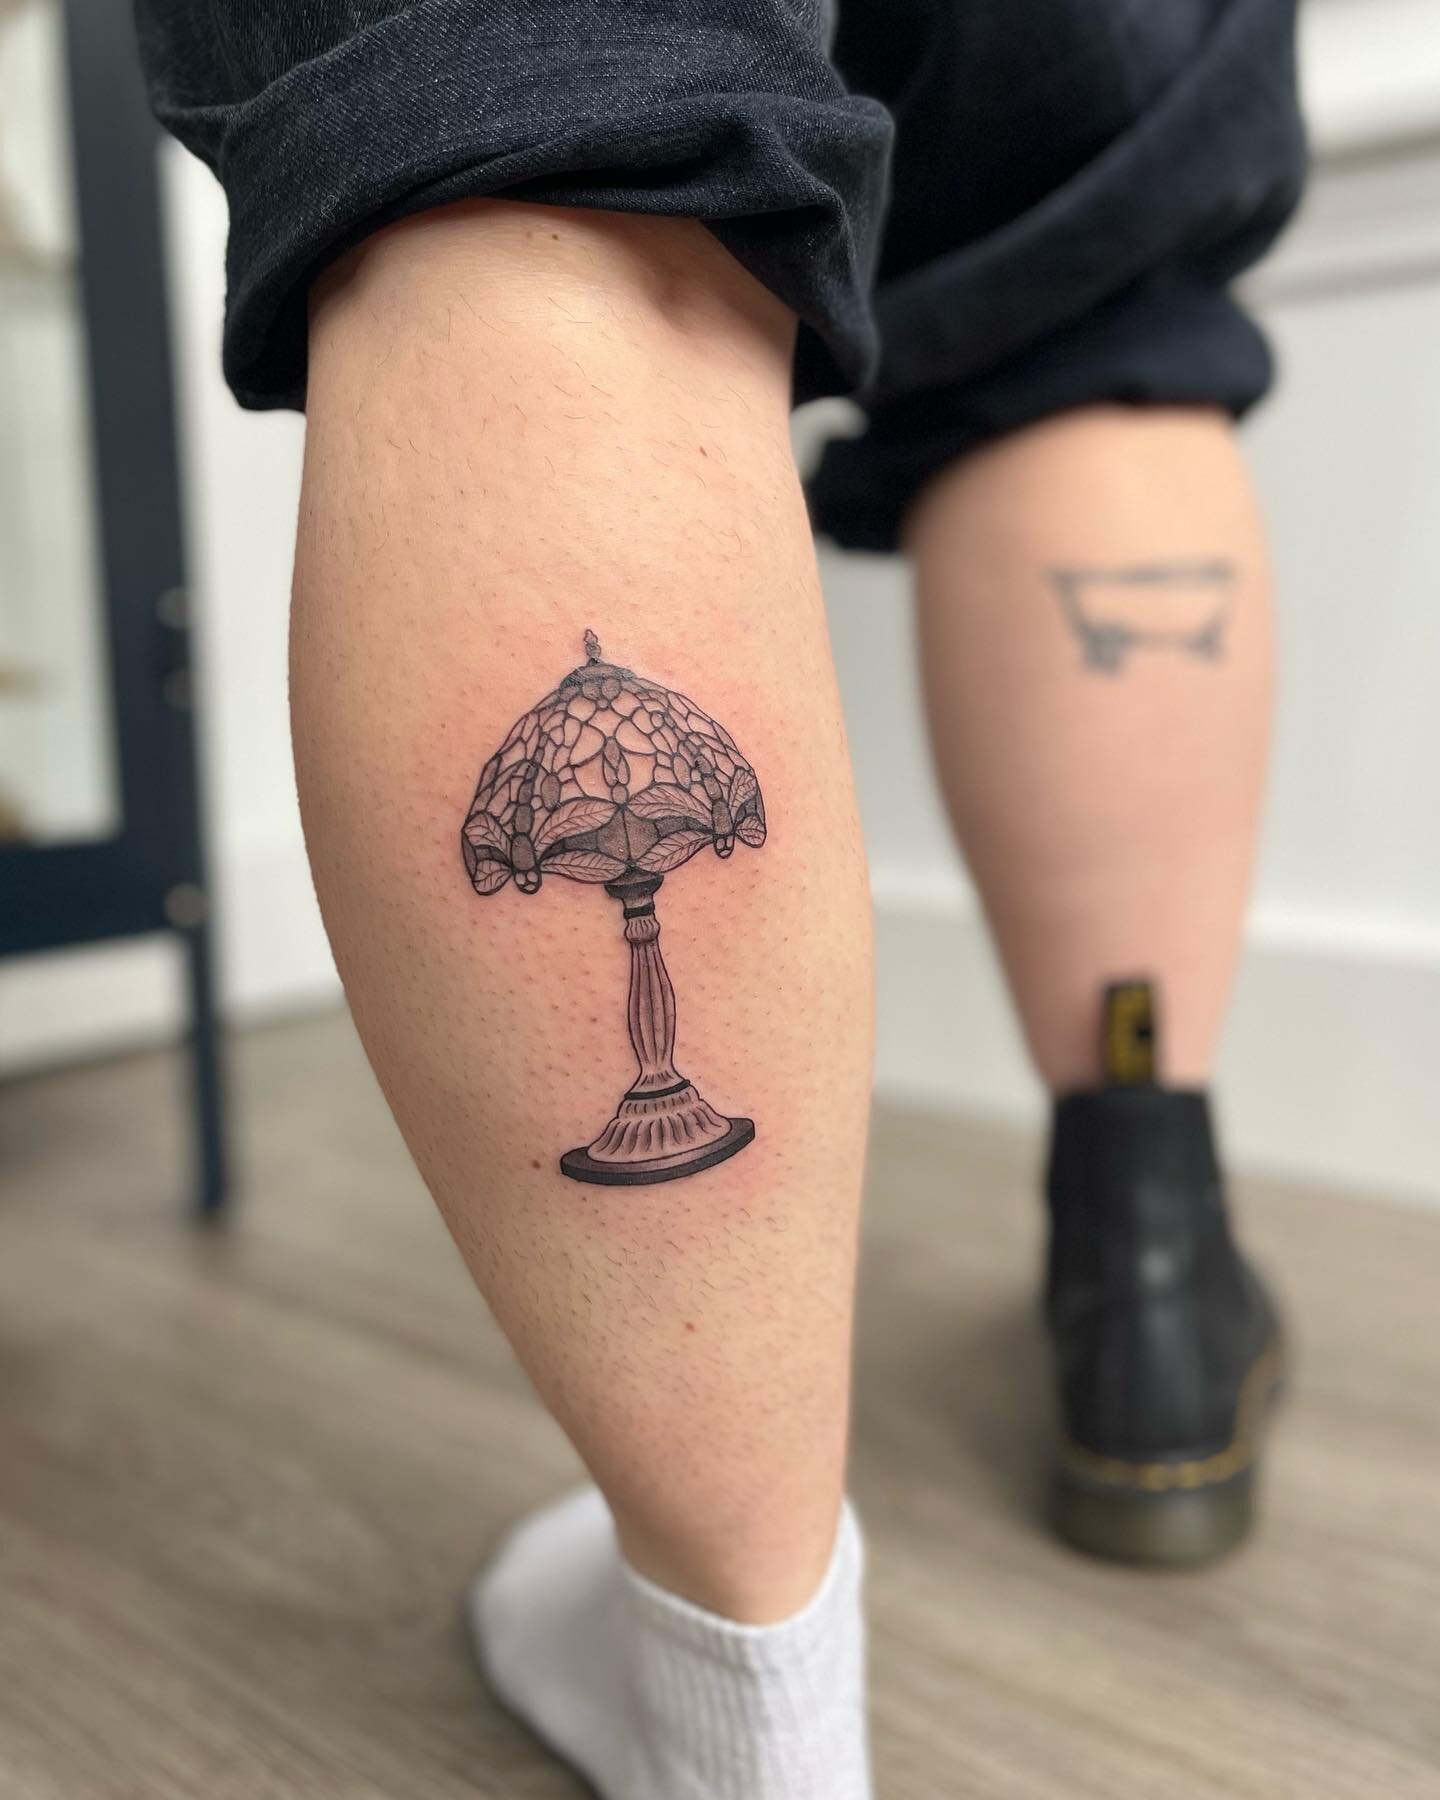 Tiffany lamp for my sweet bean @taylormberube ❤️ and a little healed shot of one of the first tattoos I ever did, healed a year and change. 
.
.
.
.
.
.
.
.
.
.
#tiffanylamp #tattoo #apprenticetattoo #tattooapprentice #healedtattoo #firsttattoo